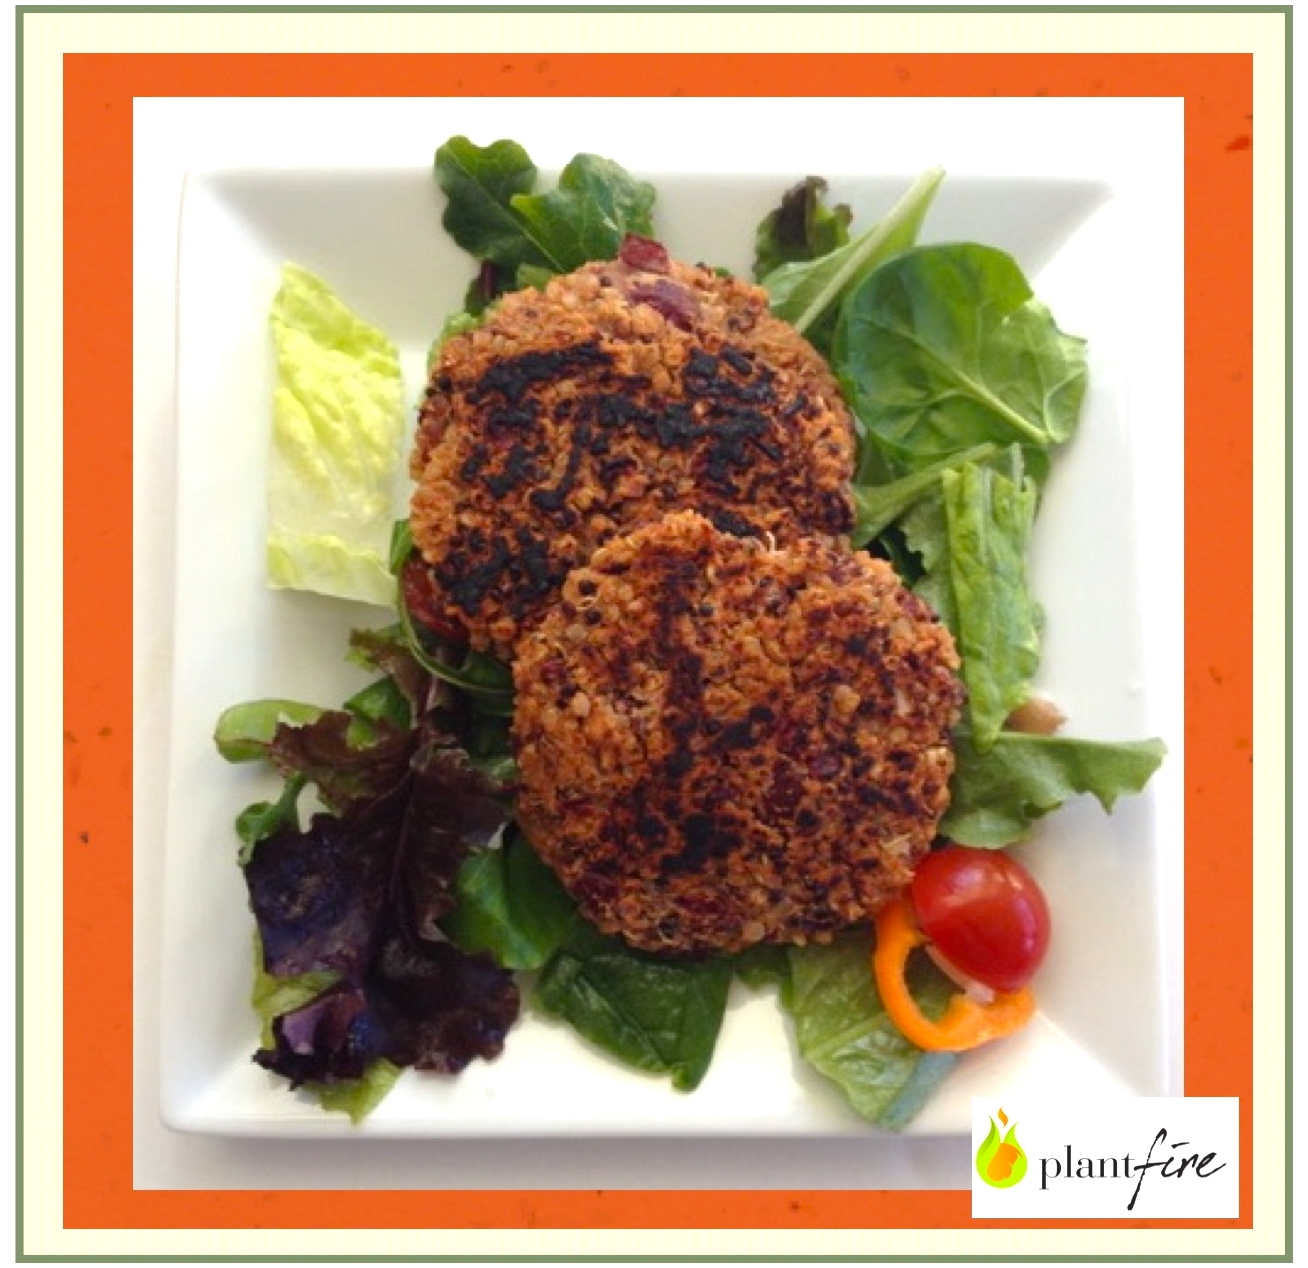 Meatless Monday – Protein Packed Quinoa Burgers